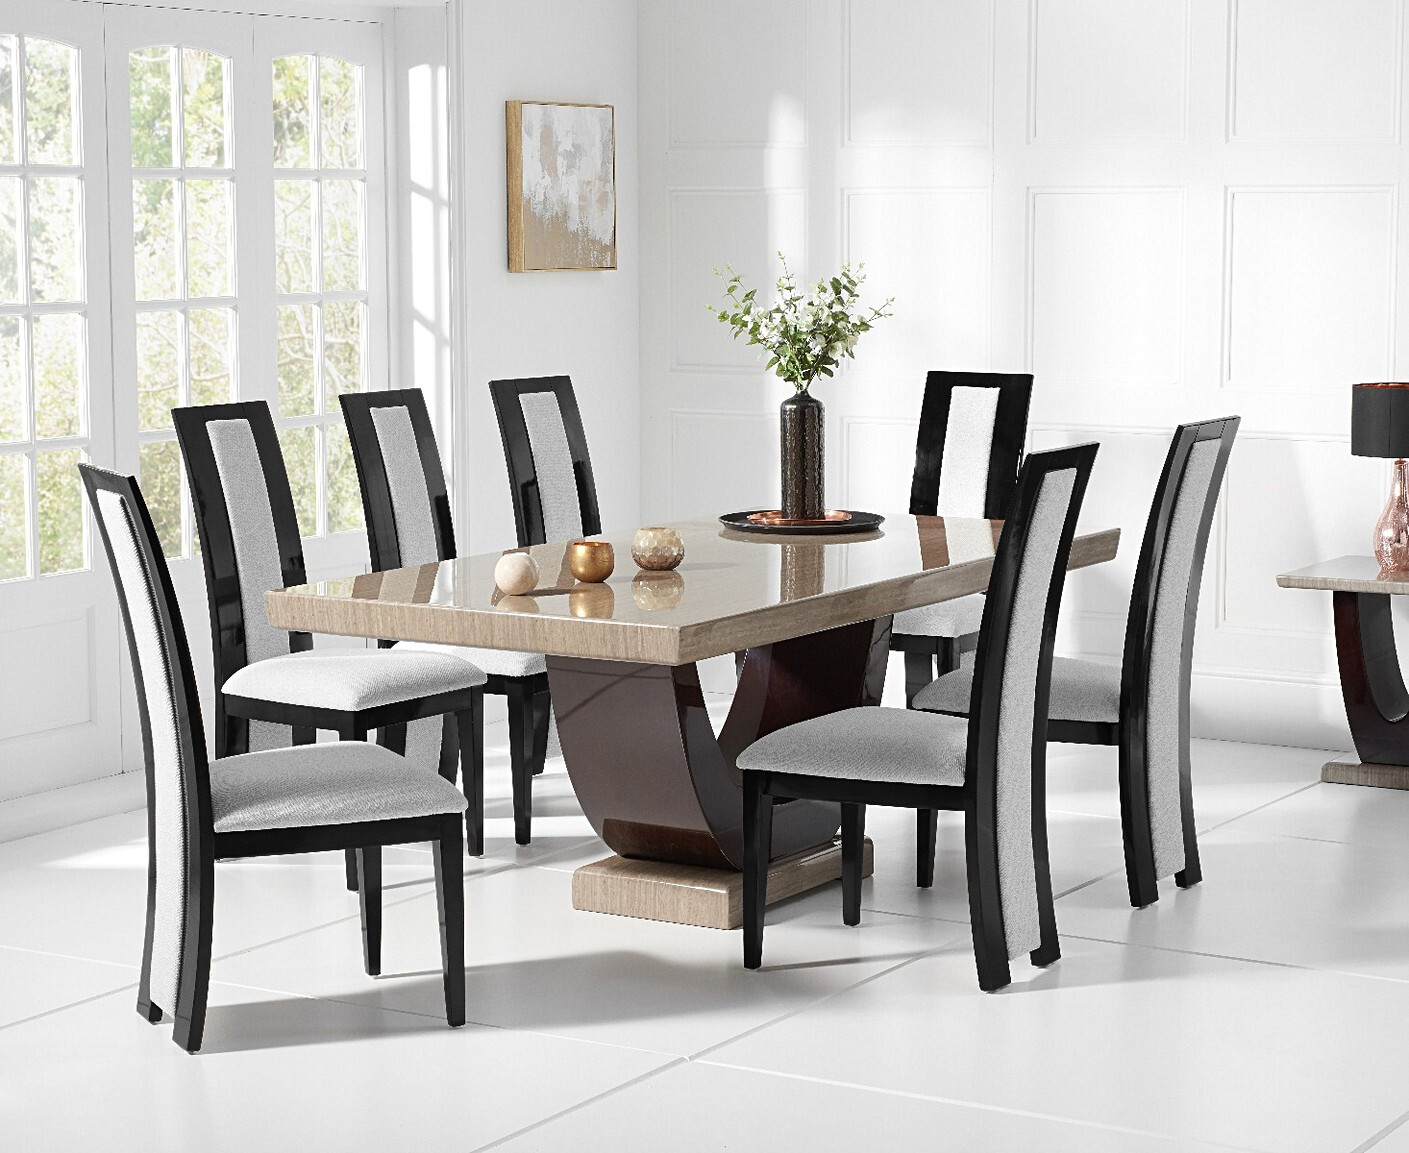 Photo 2 of Novara 200cm brown pedestal marble dining table with 10 brown novara chairs